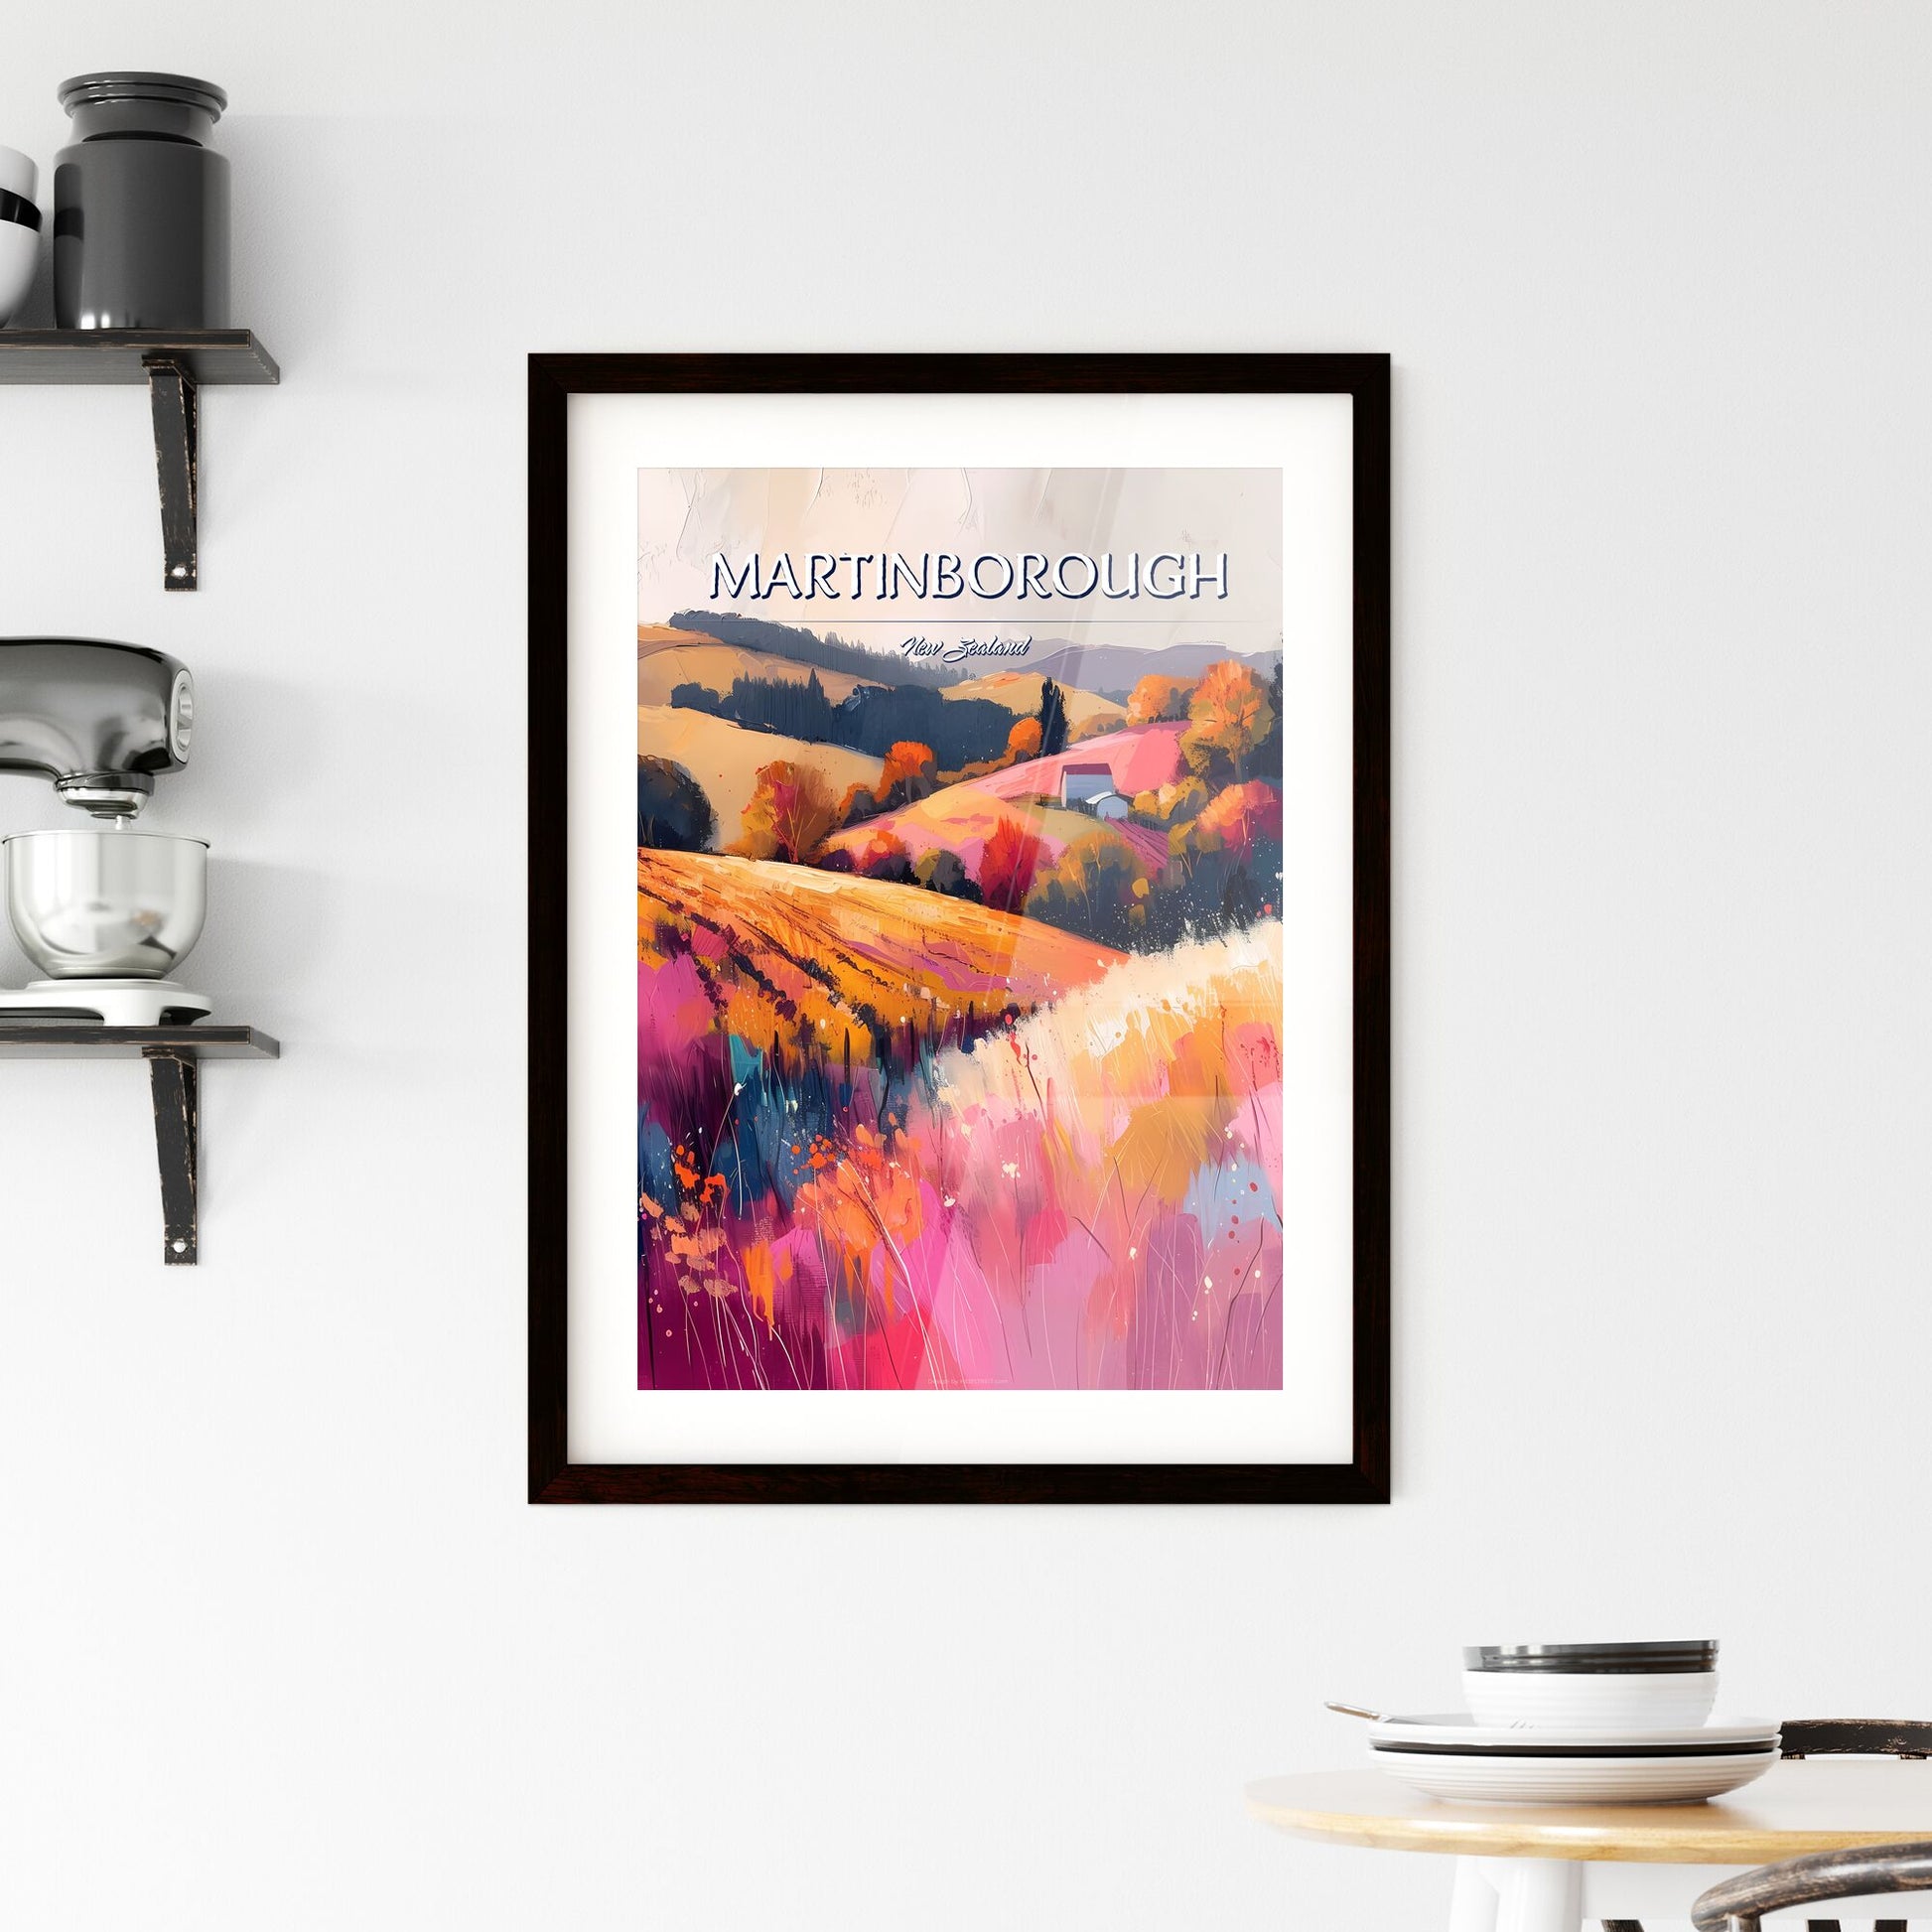 Martinborough, New Zealand - Art print of a painting of a field of flowers and trees Default Title